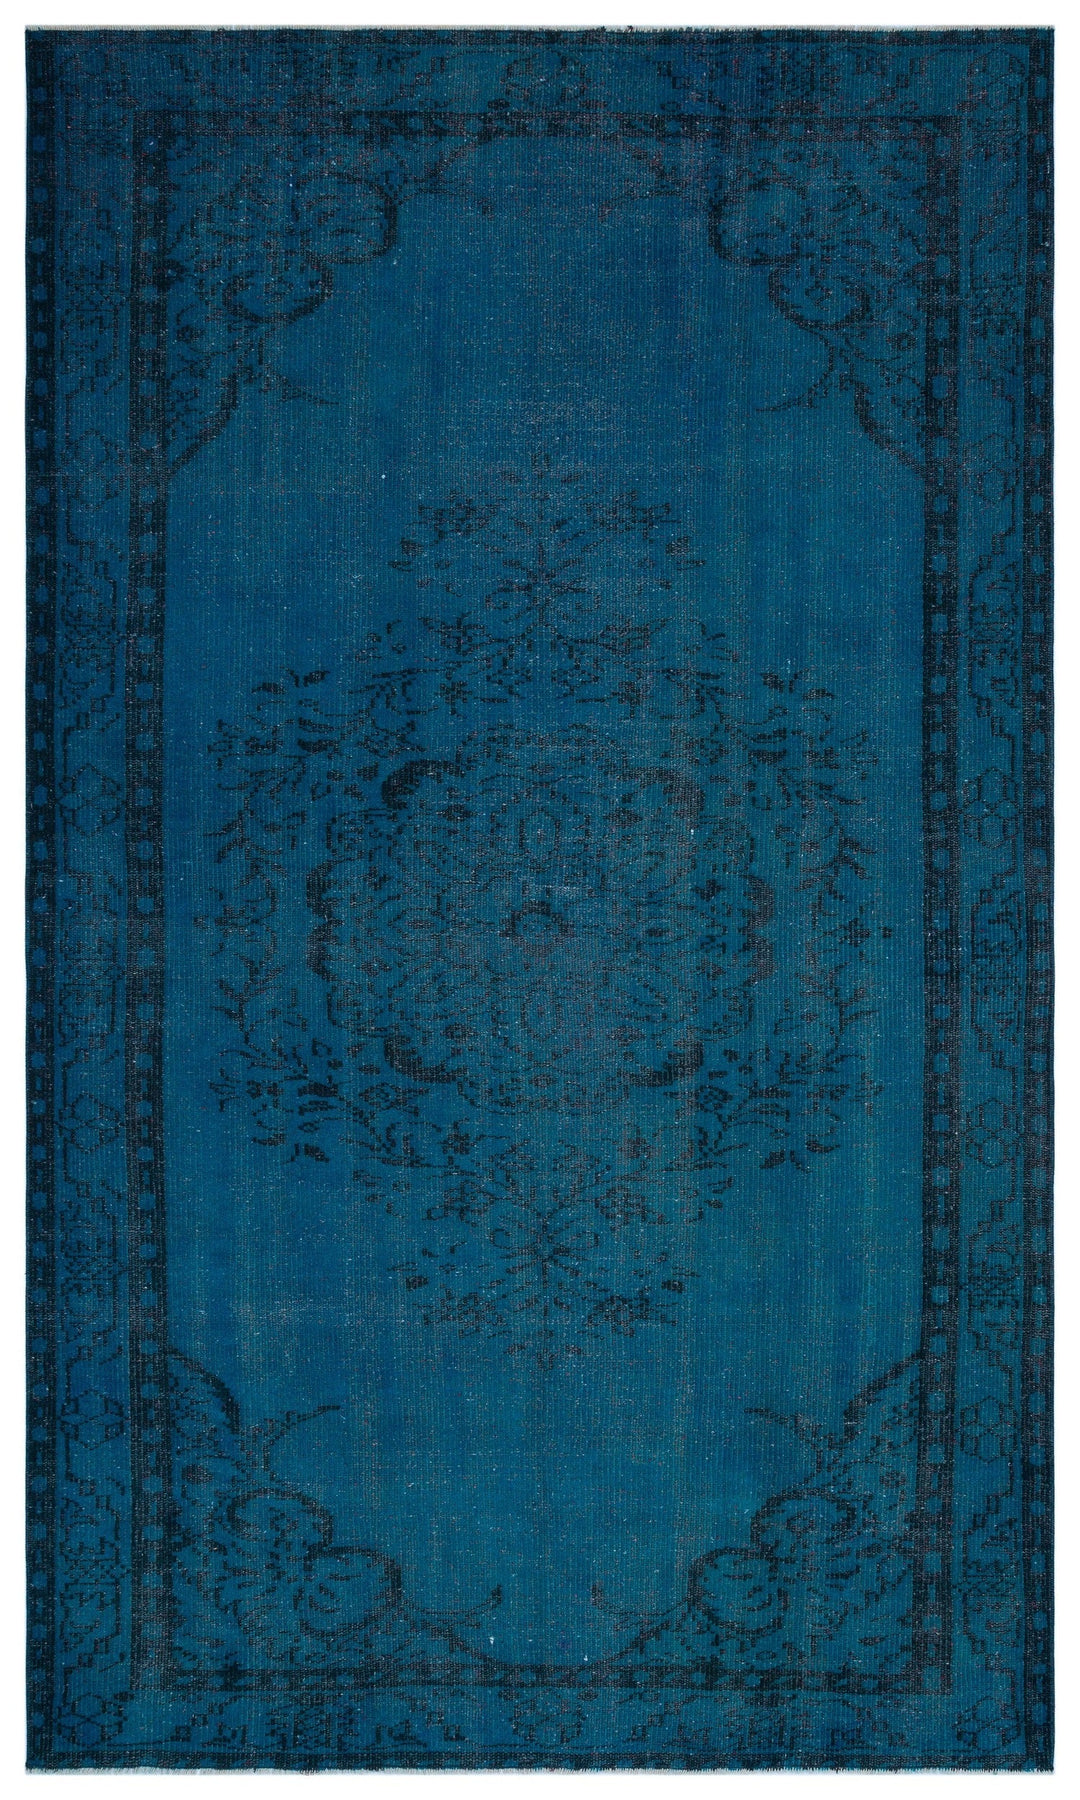 Athens Turquoise Tumbled Wool Hand Woven Rug 167 x 275